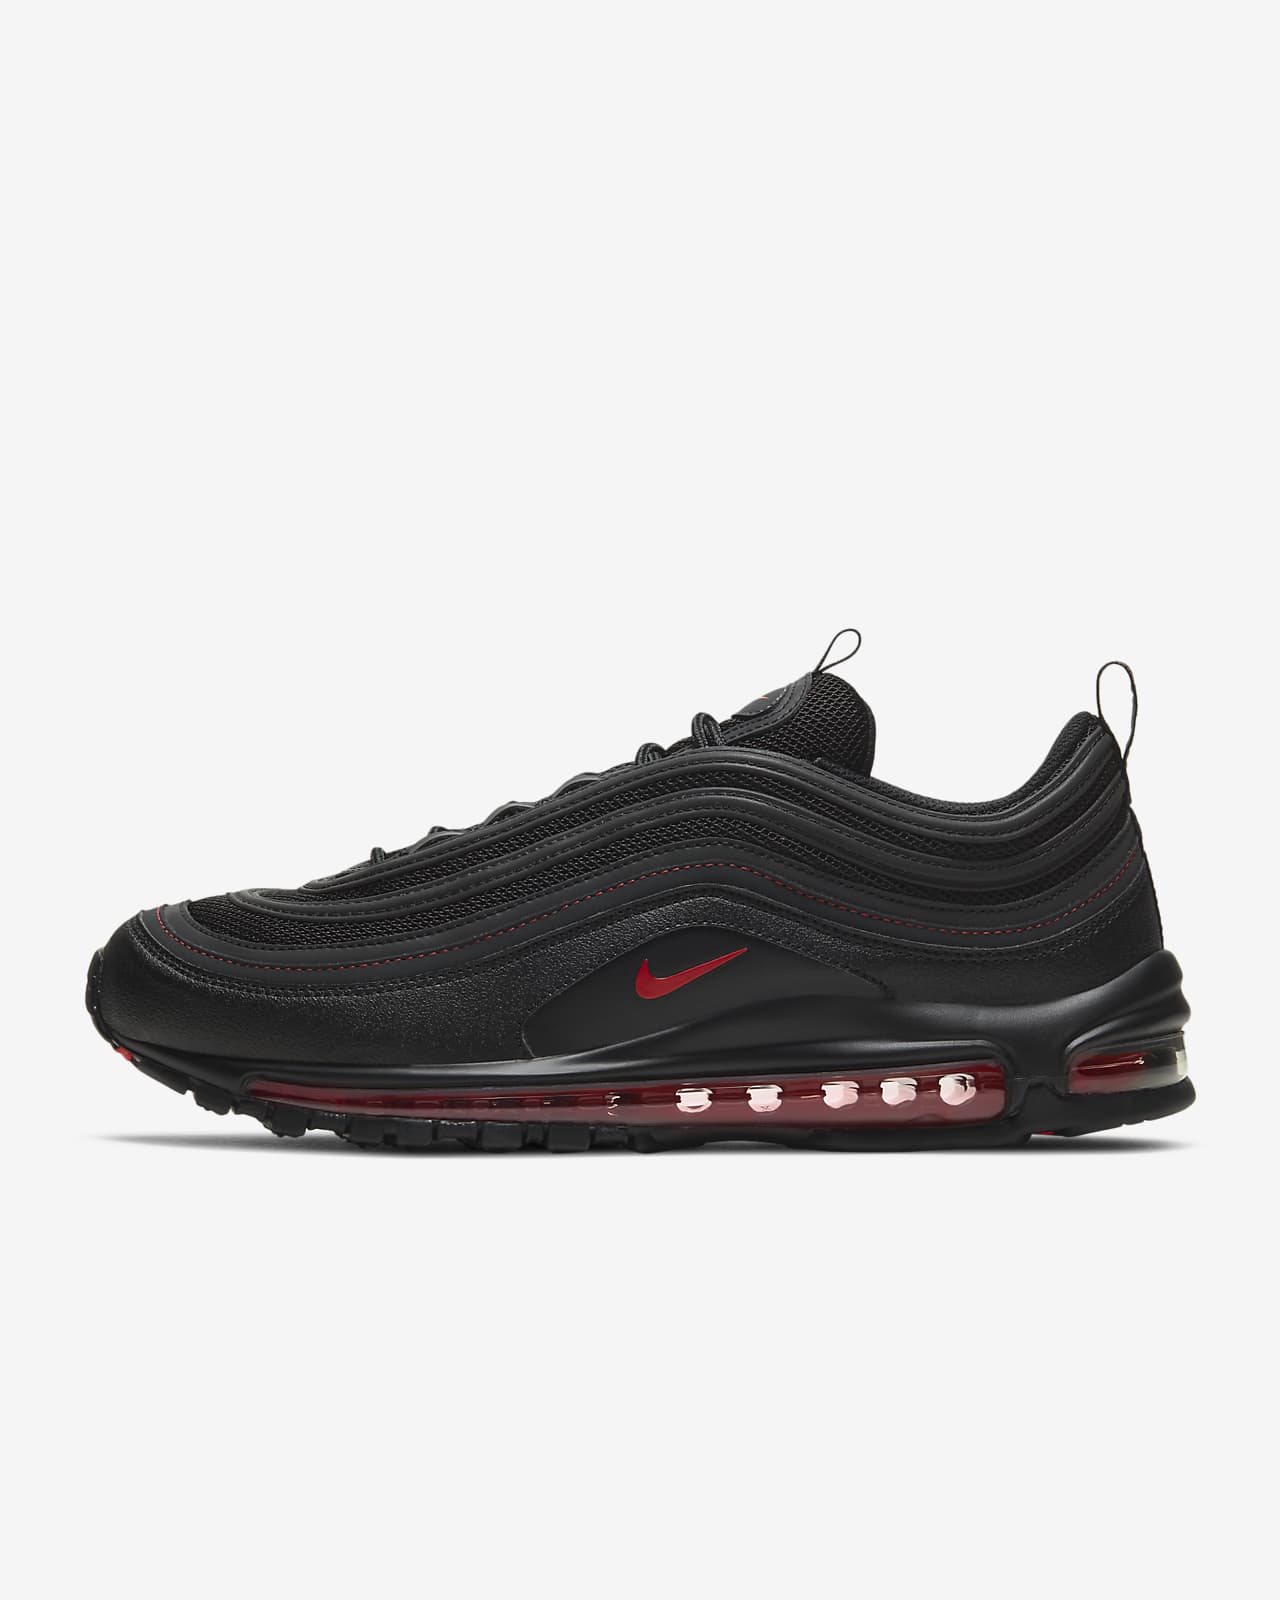 the new nike air max 97